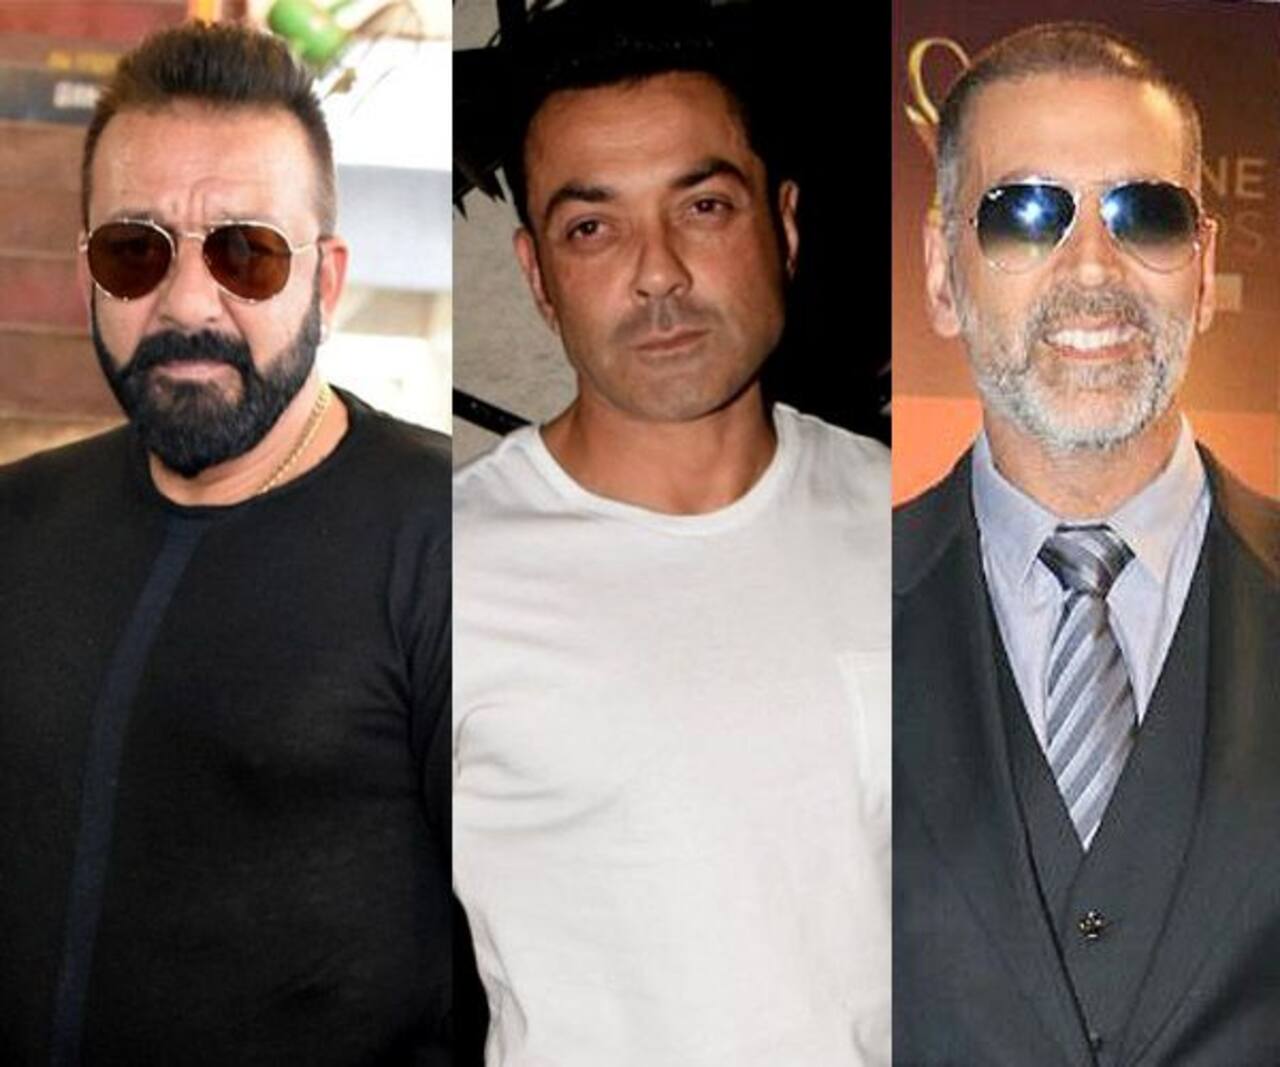 Sanjay Dutt, Akshay Kumar, Bobby Deol, Riteish Deshmukh: Is this the final  cast of Housefull 4? - Bollywood News & Gossip, Movie Reviews, Trailers &  Videos at 